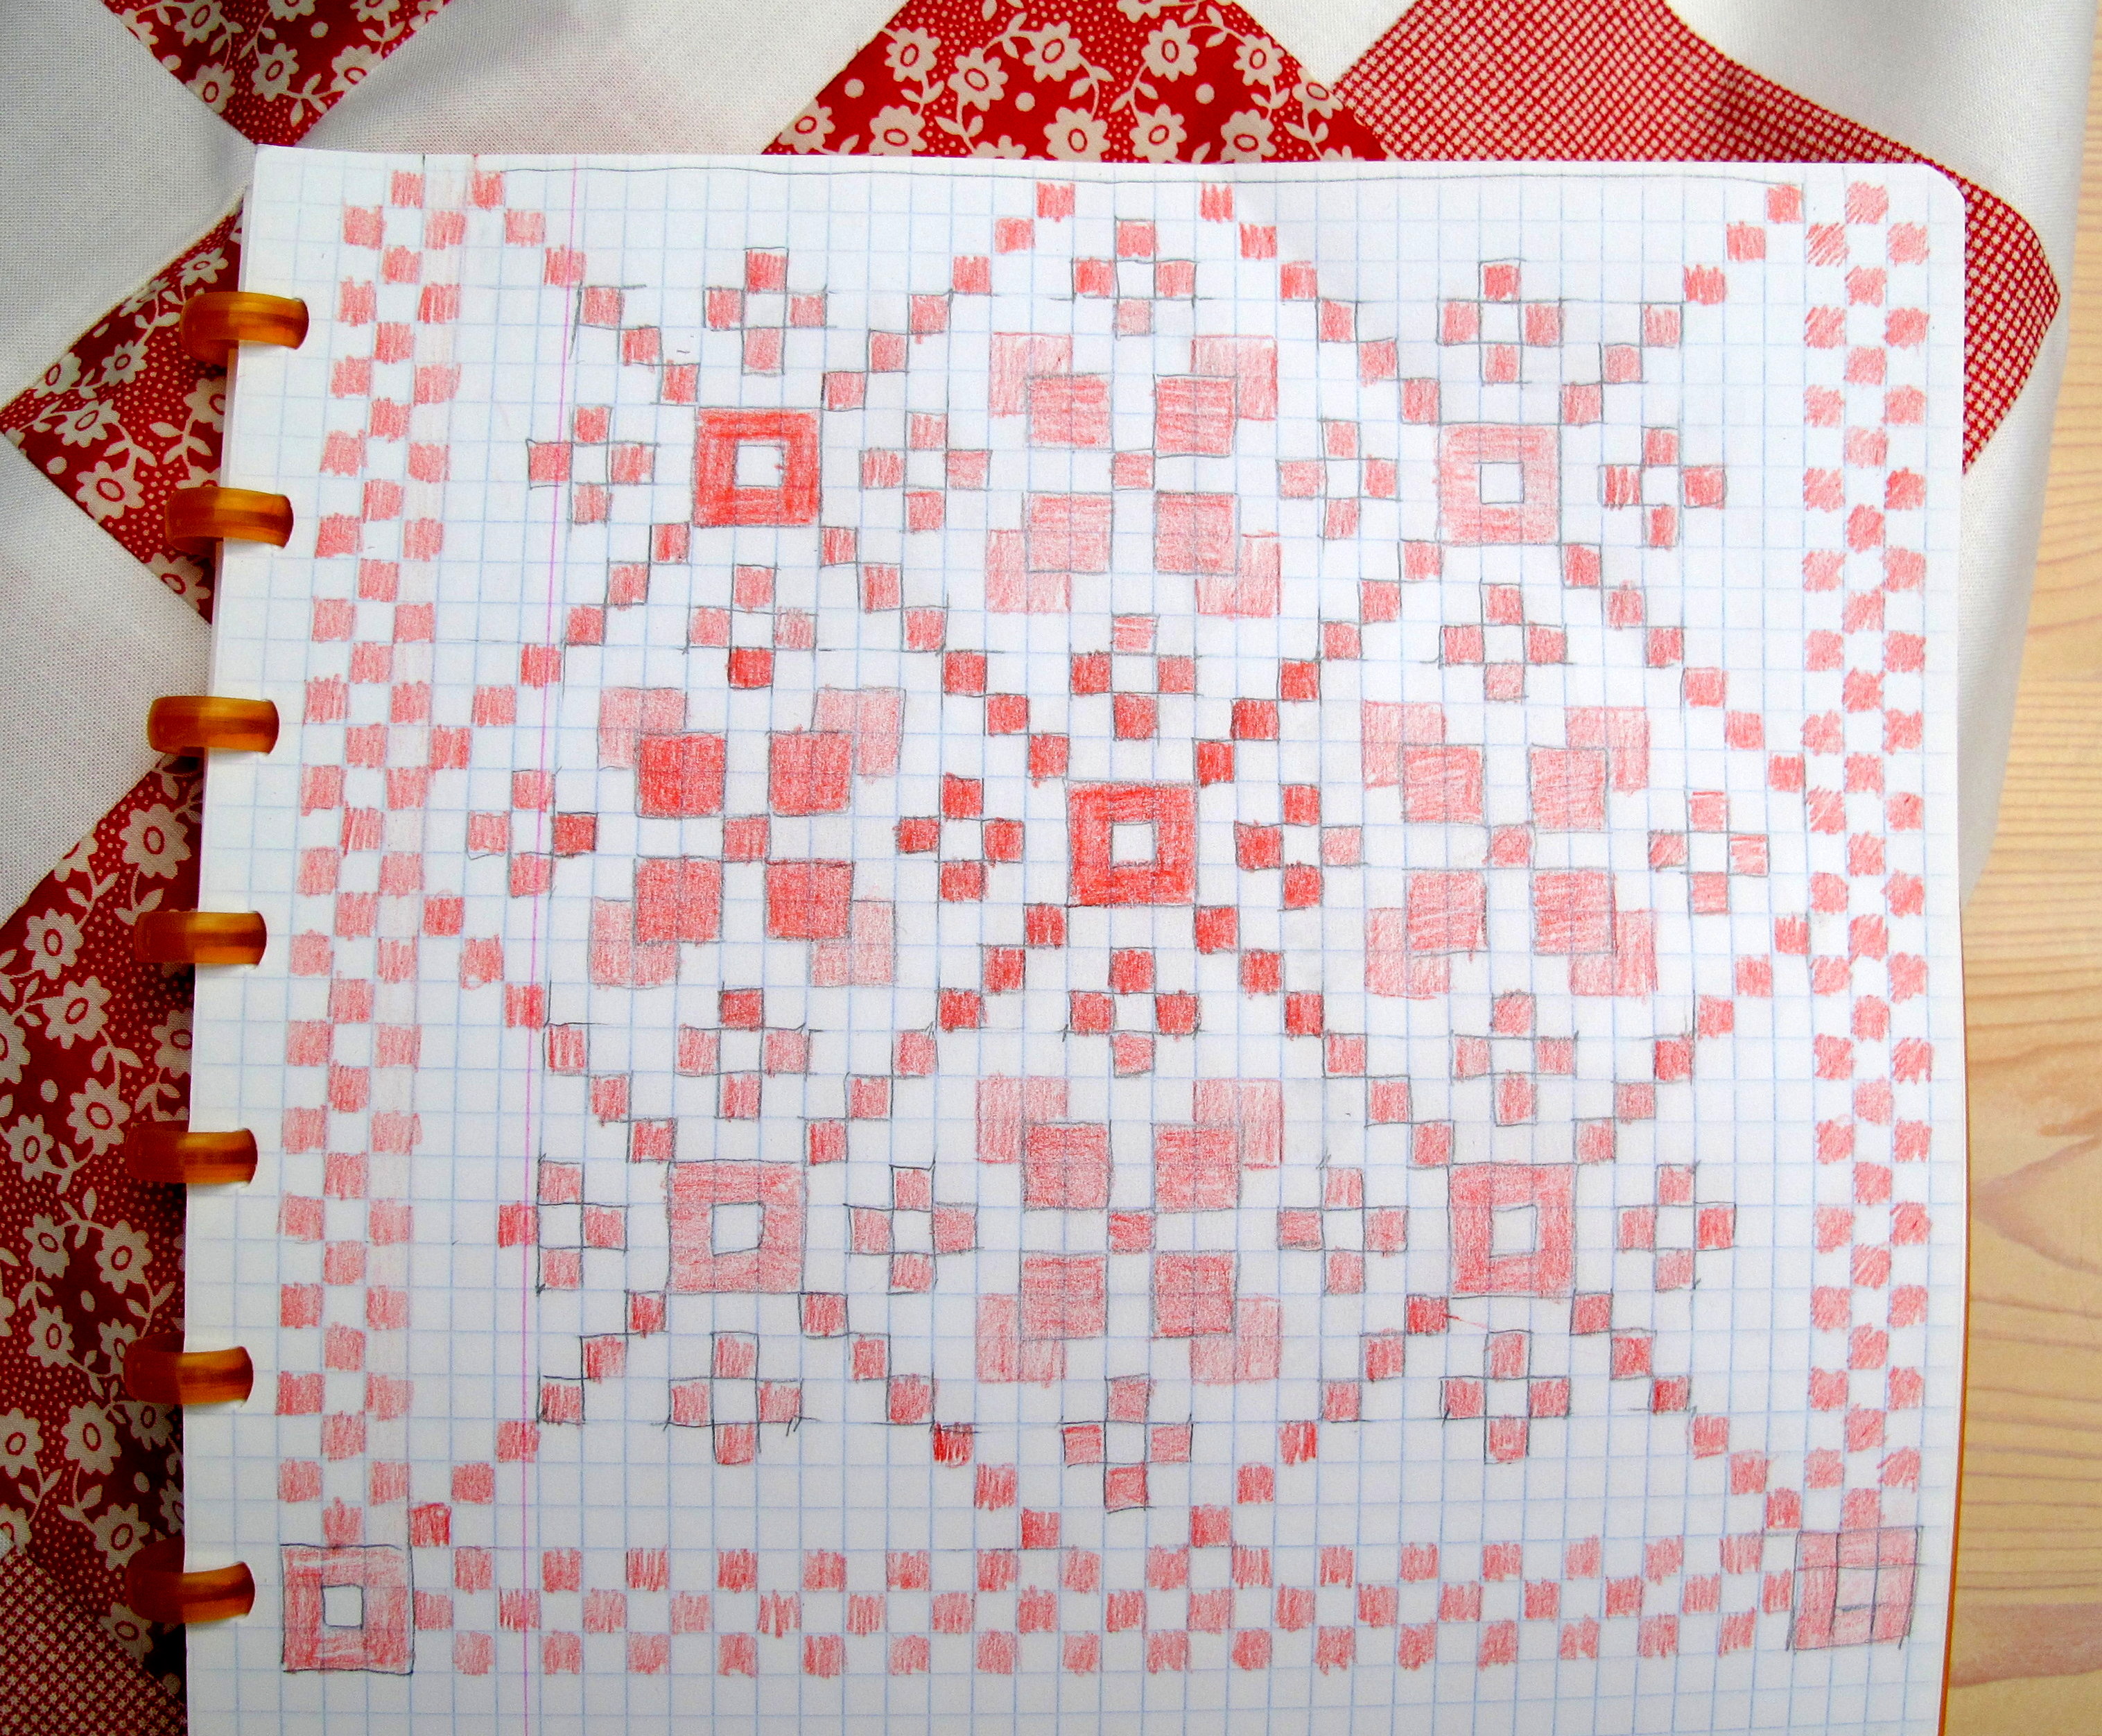 Pattern for red and white quilt